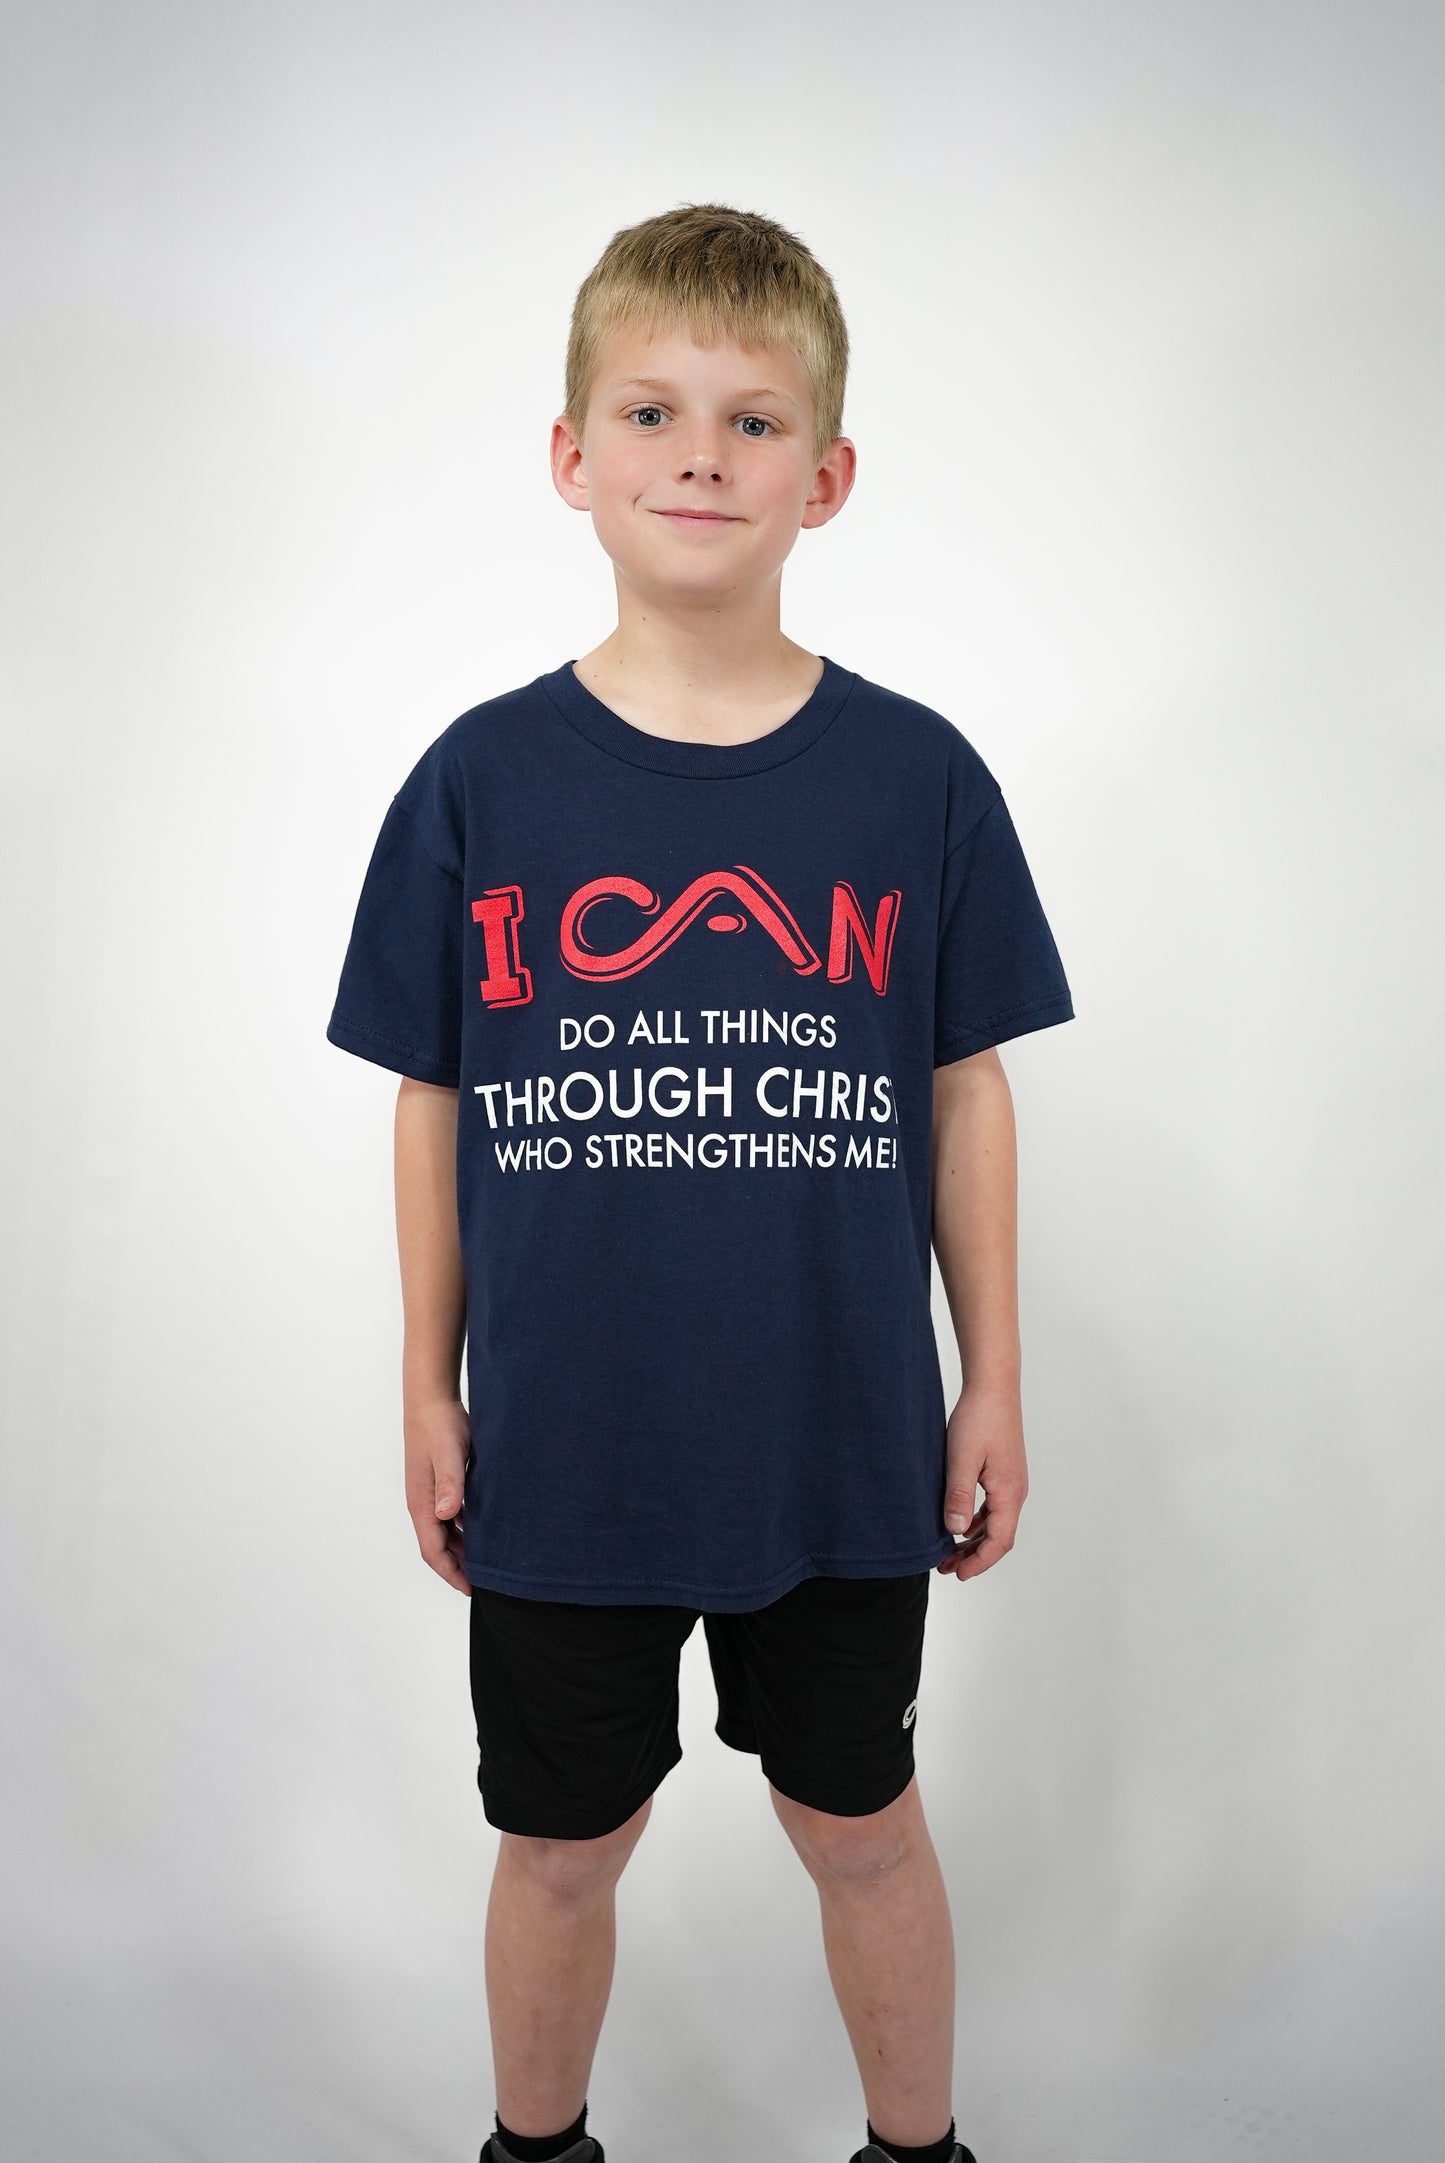 I CAN Youth Performance Tee